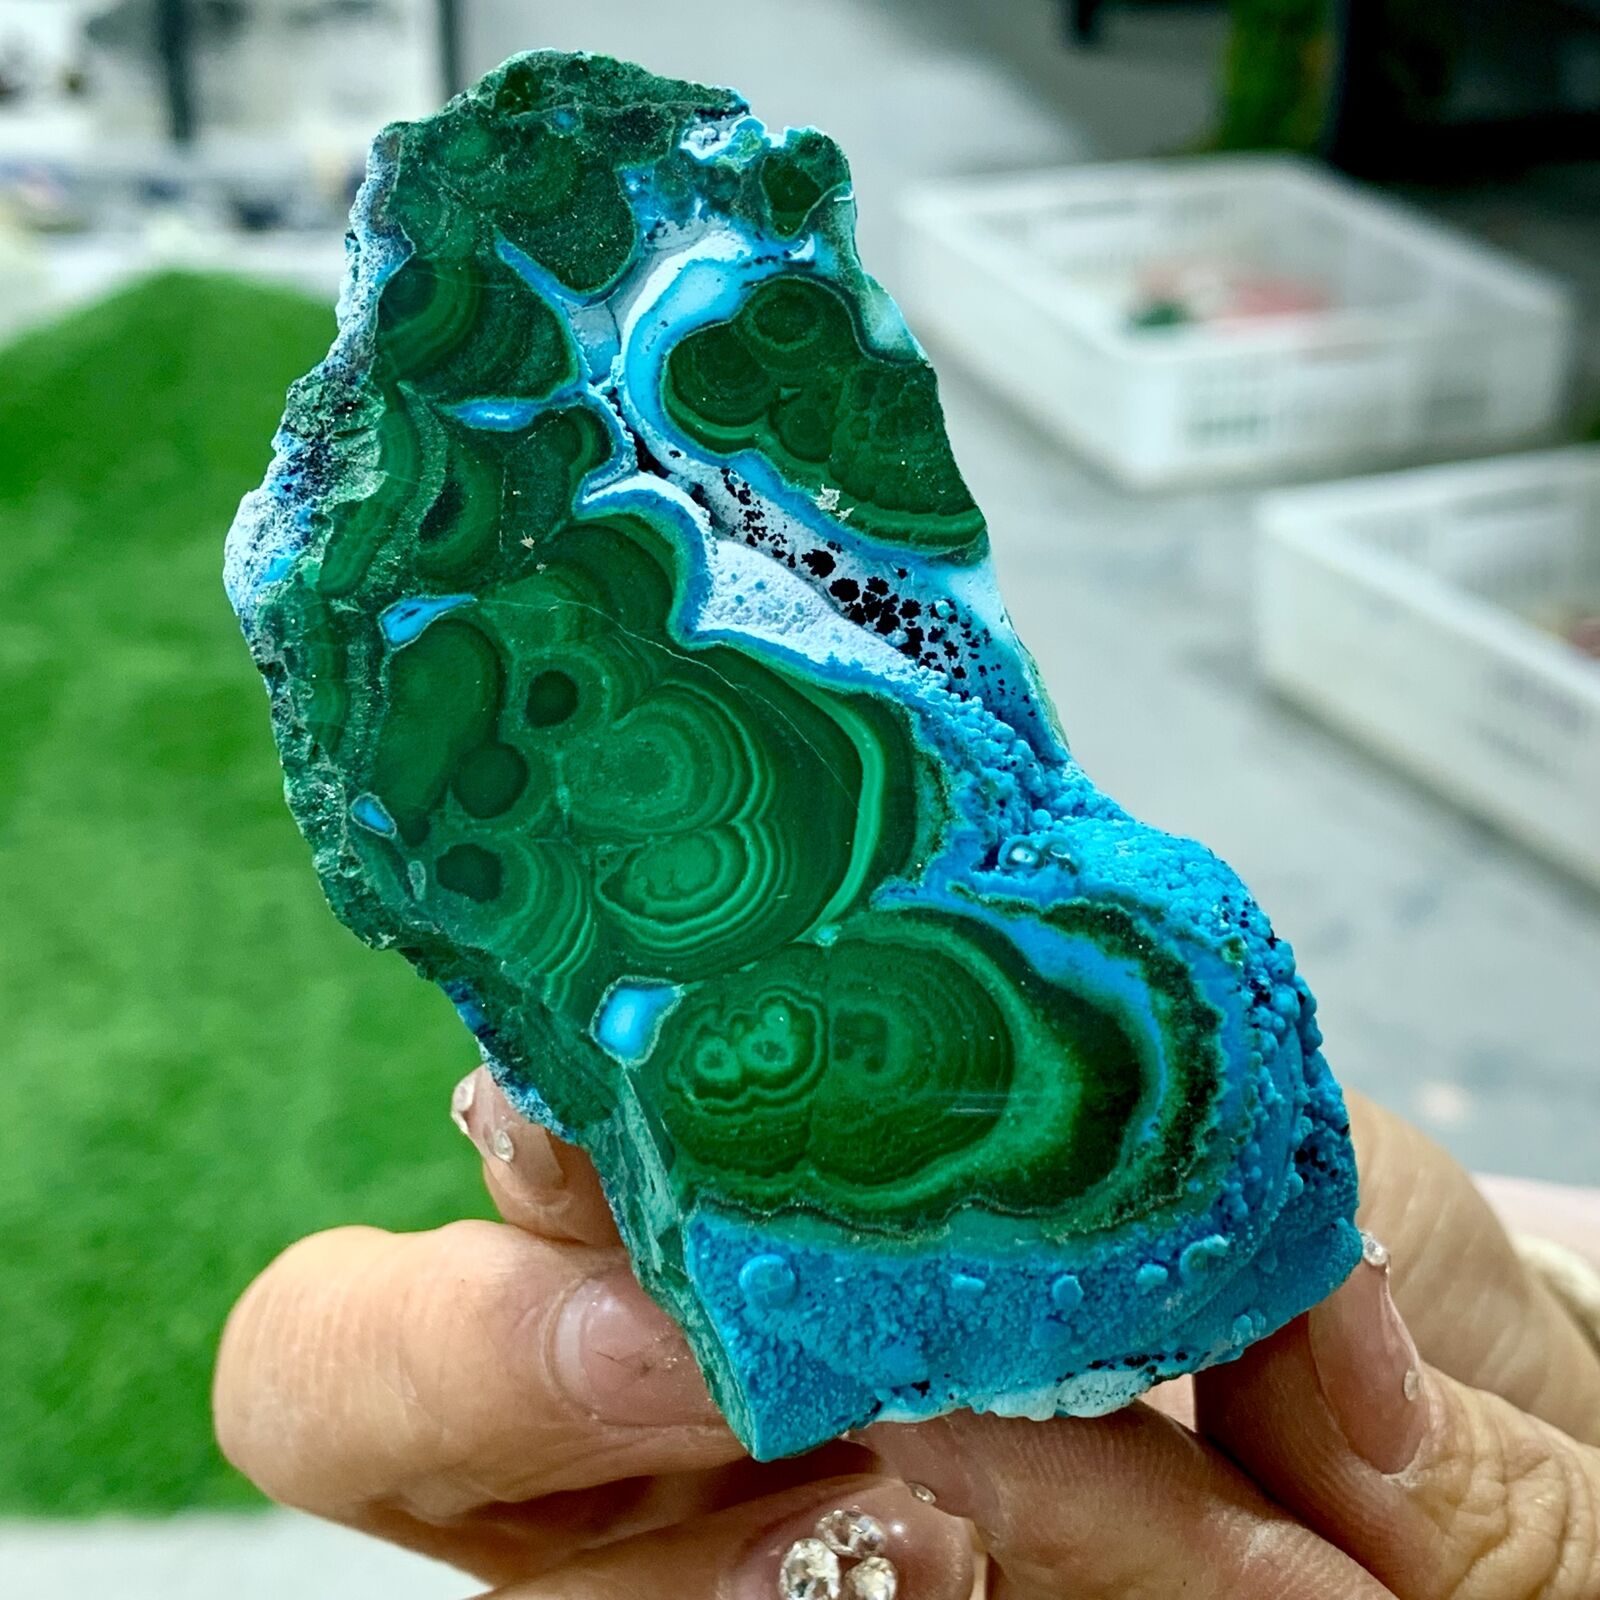 155g Natural chrysocolla/Malachite transparent cluster rough mineral sample